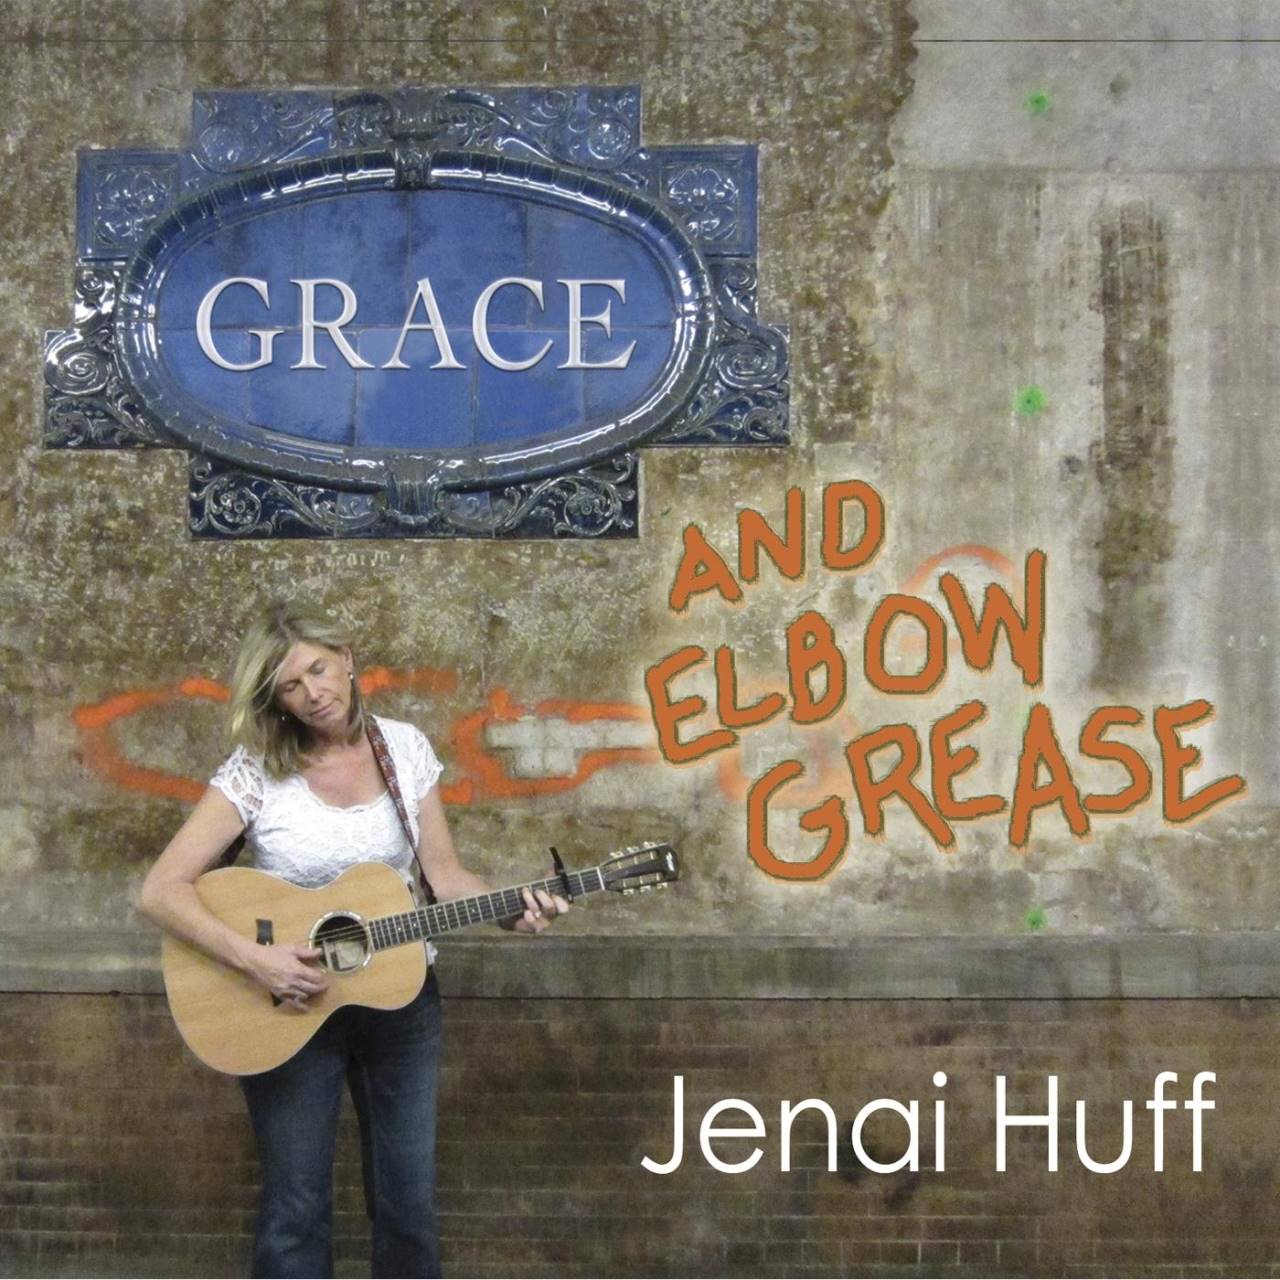 Jenai Huff - Grace And Elbow Grease cover album